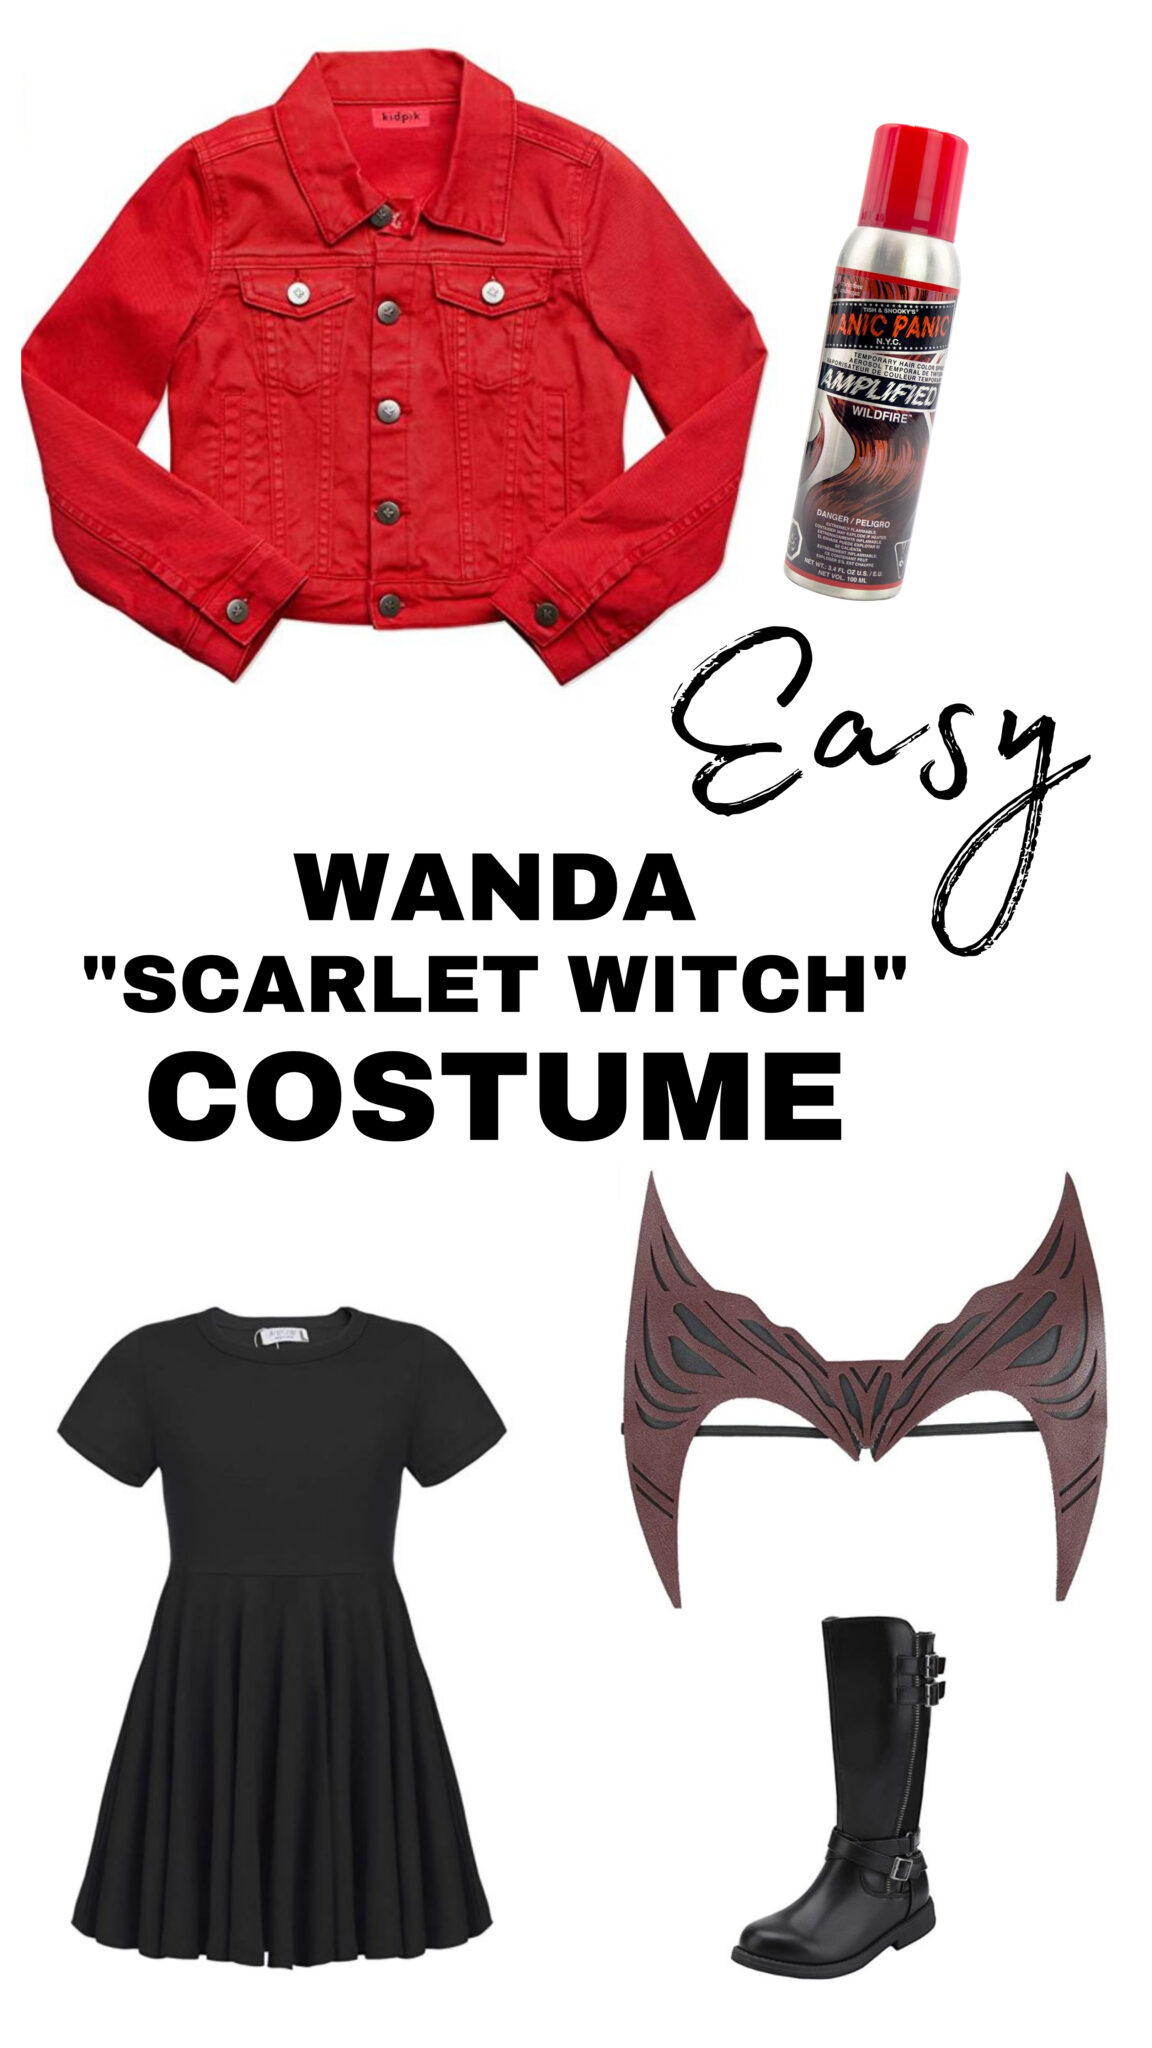 East DIY Marvel Themed Costumes for Halloween Using Regular Clothes All Things with Purpose Sarah Lemp